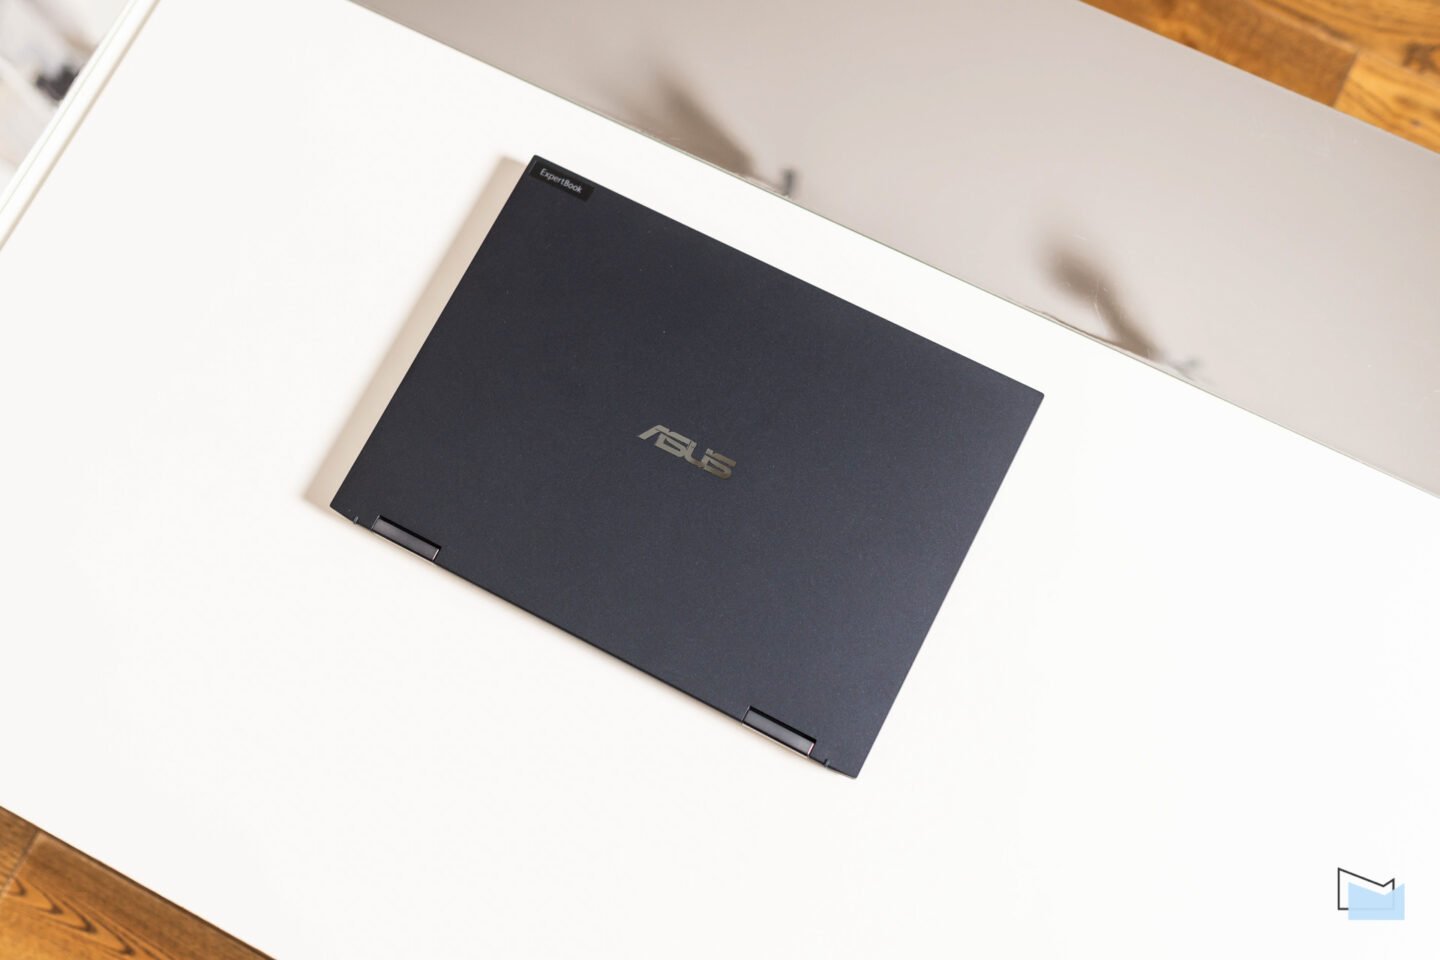 ASUS ExpertBook B7 Flip review: professional laptop-transformer with 5G